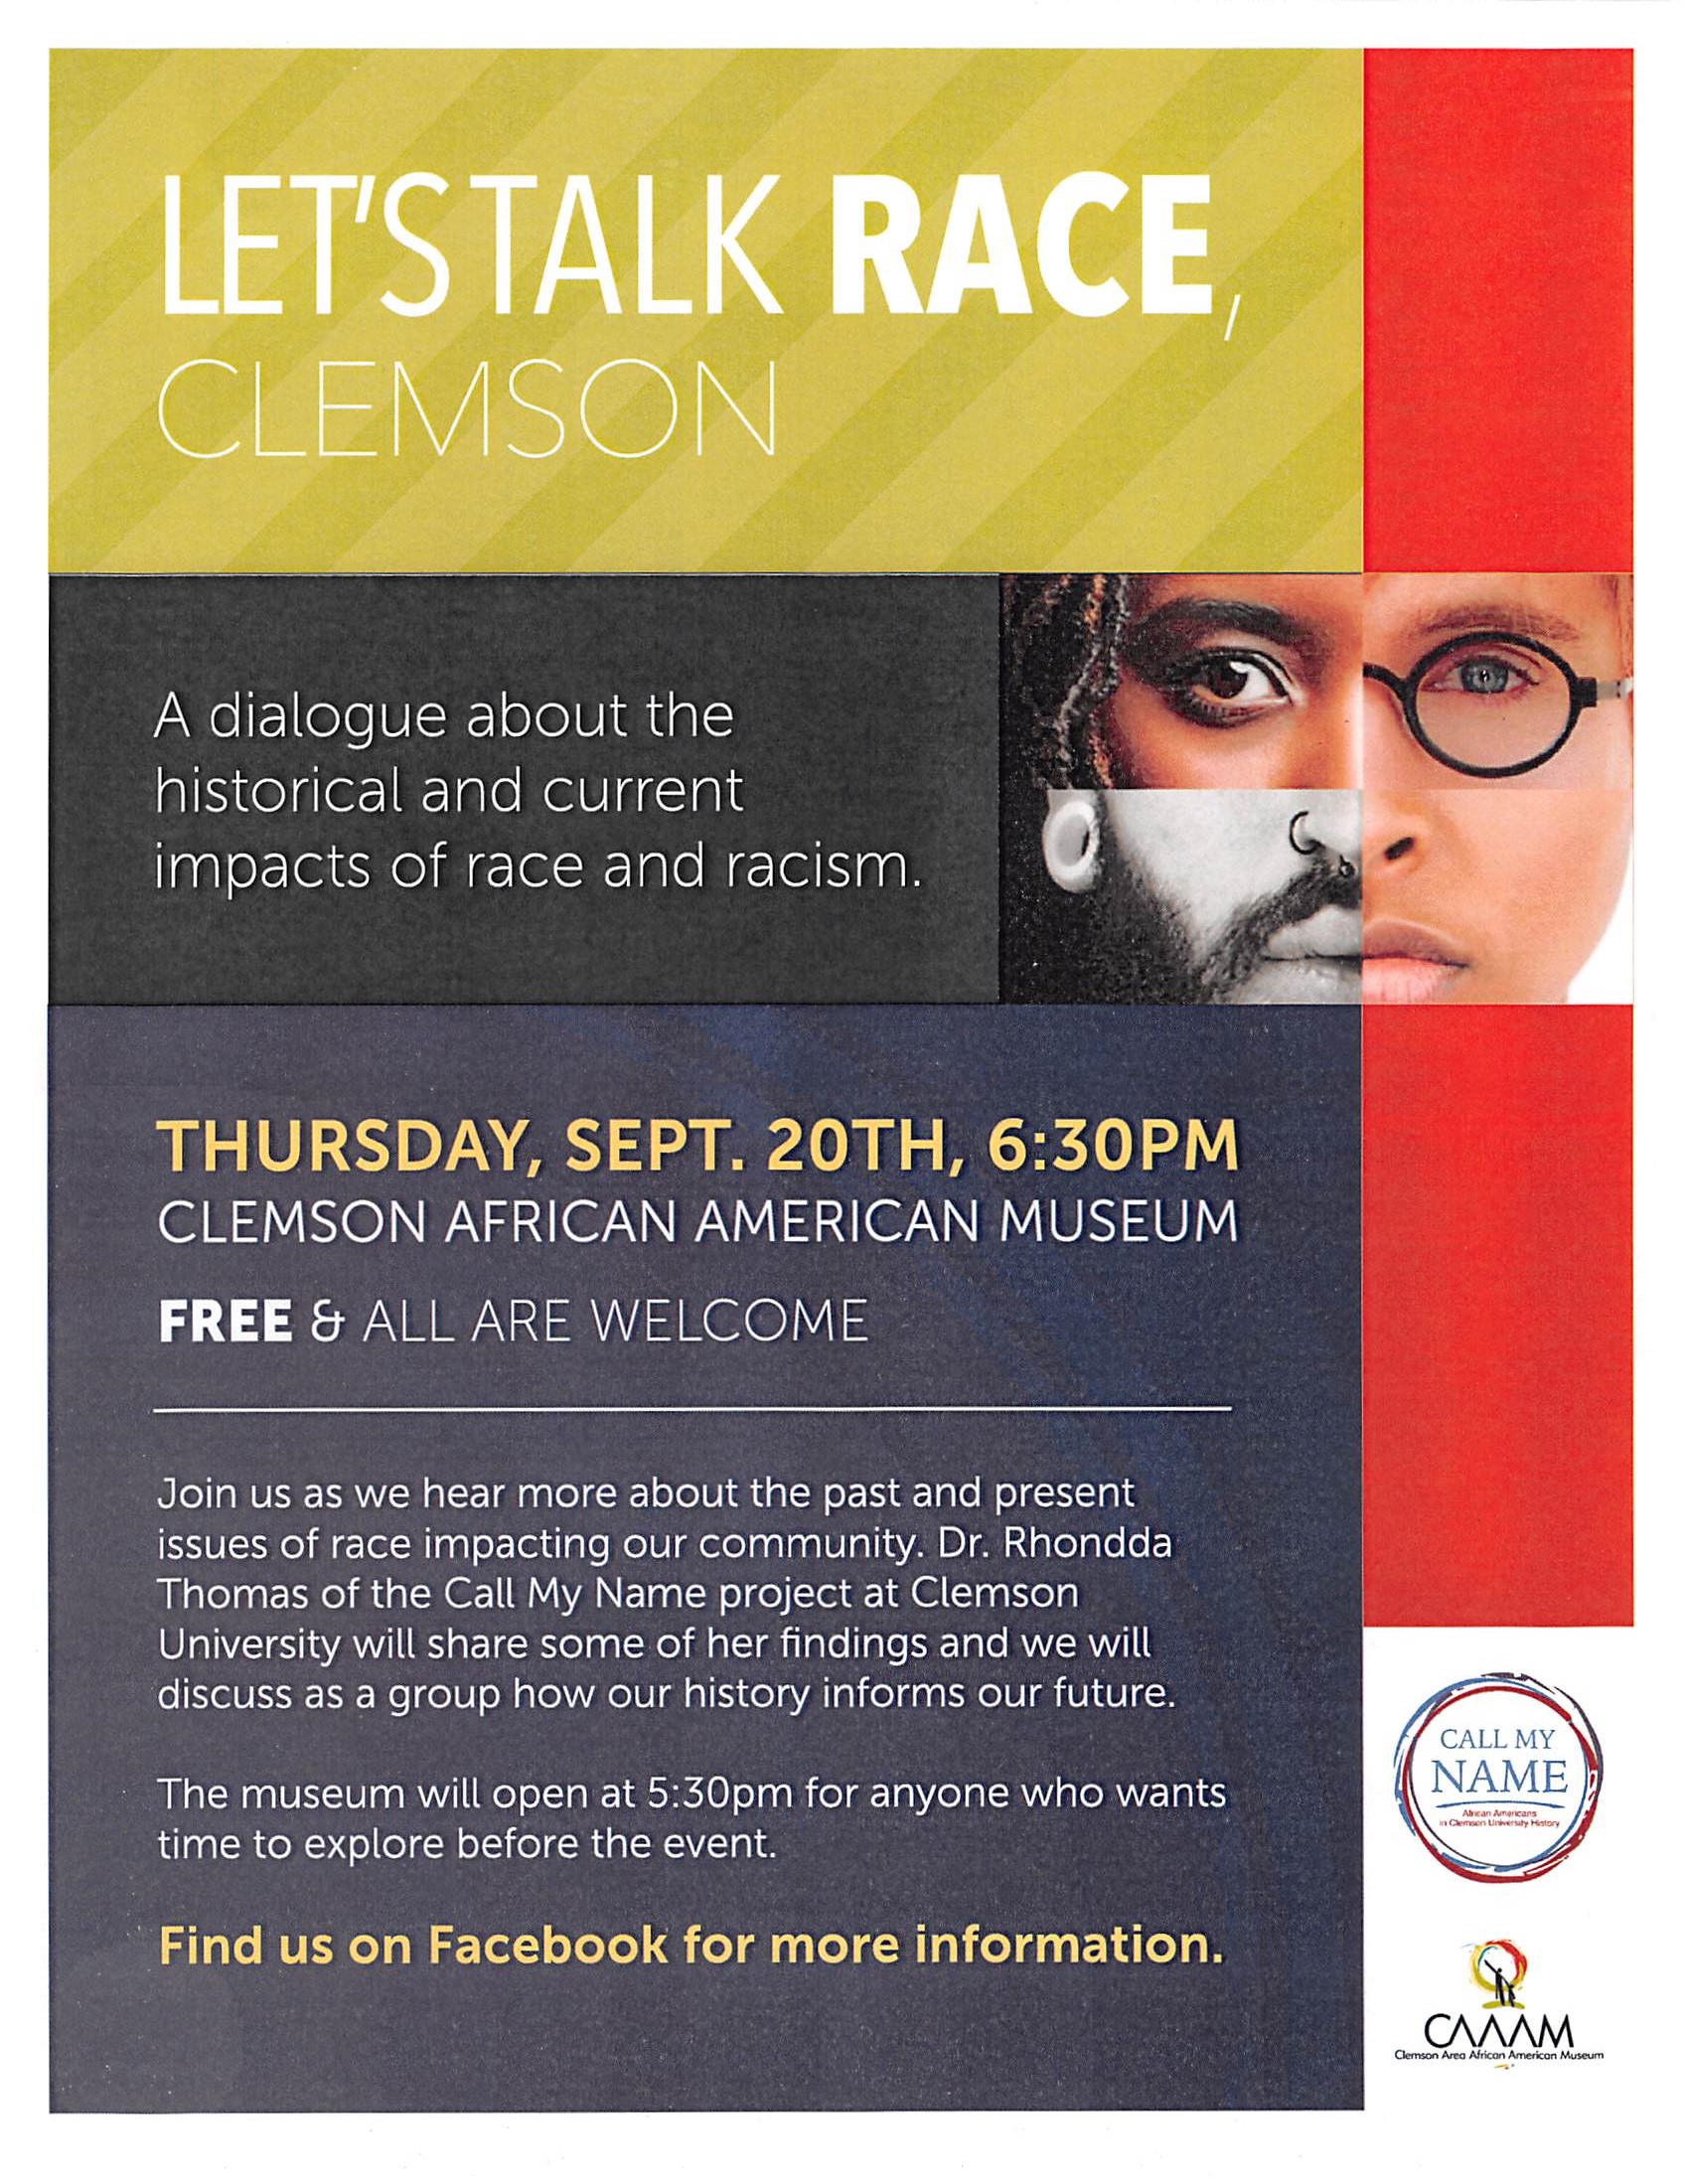 CAAAM's Let's Talk Race, Clemson September 20th at 6:30pm